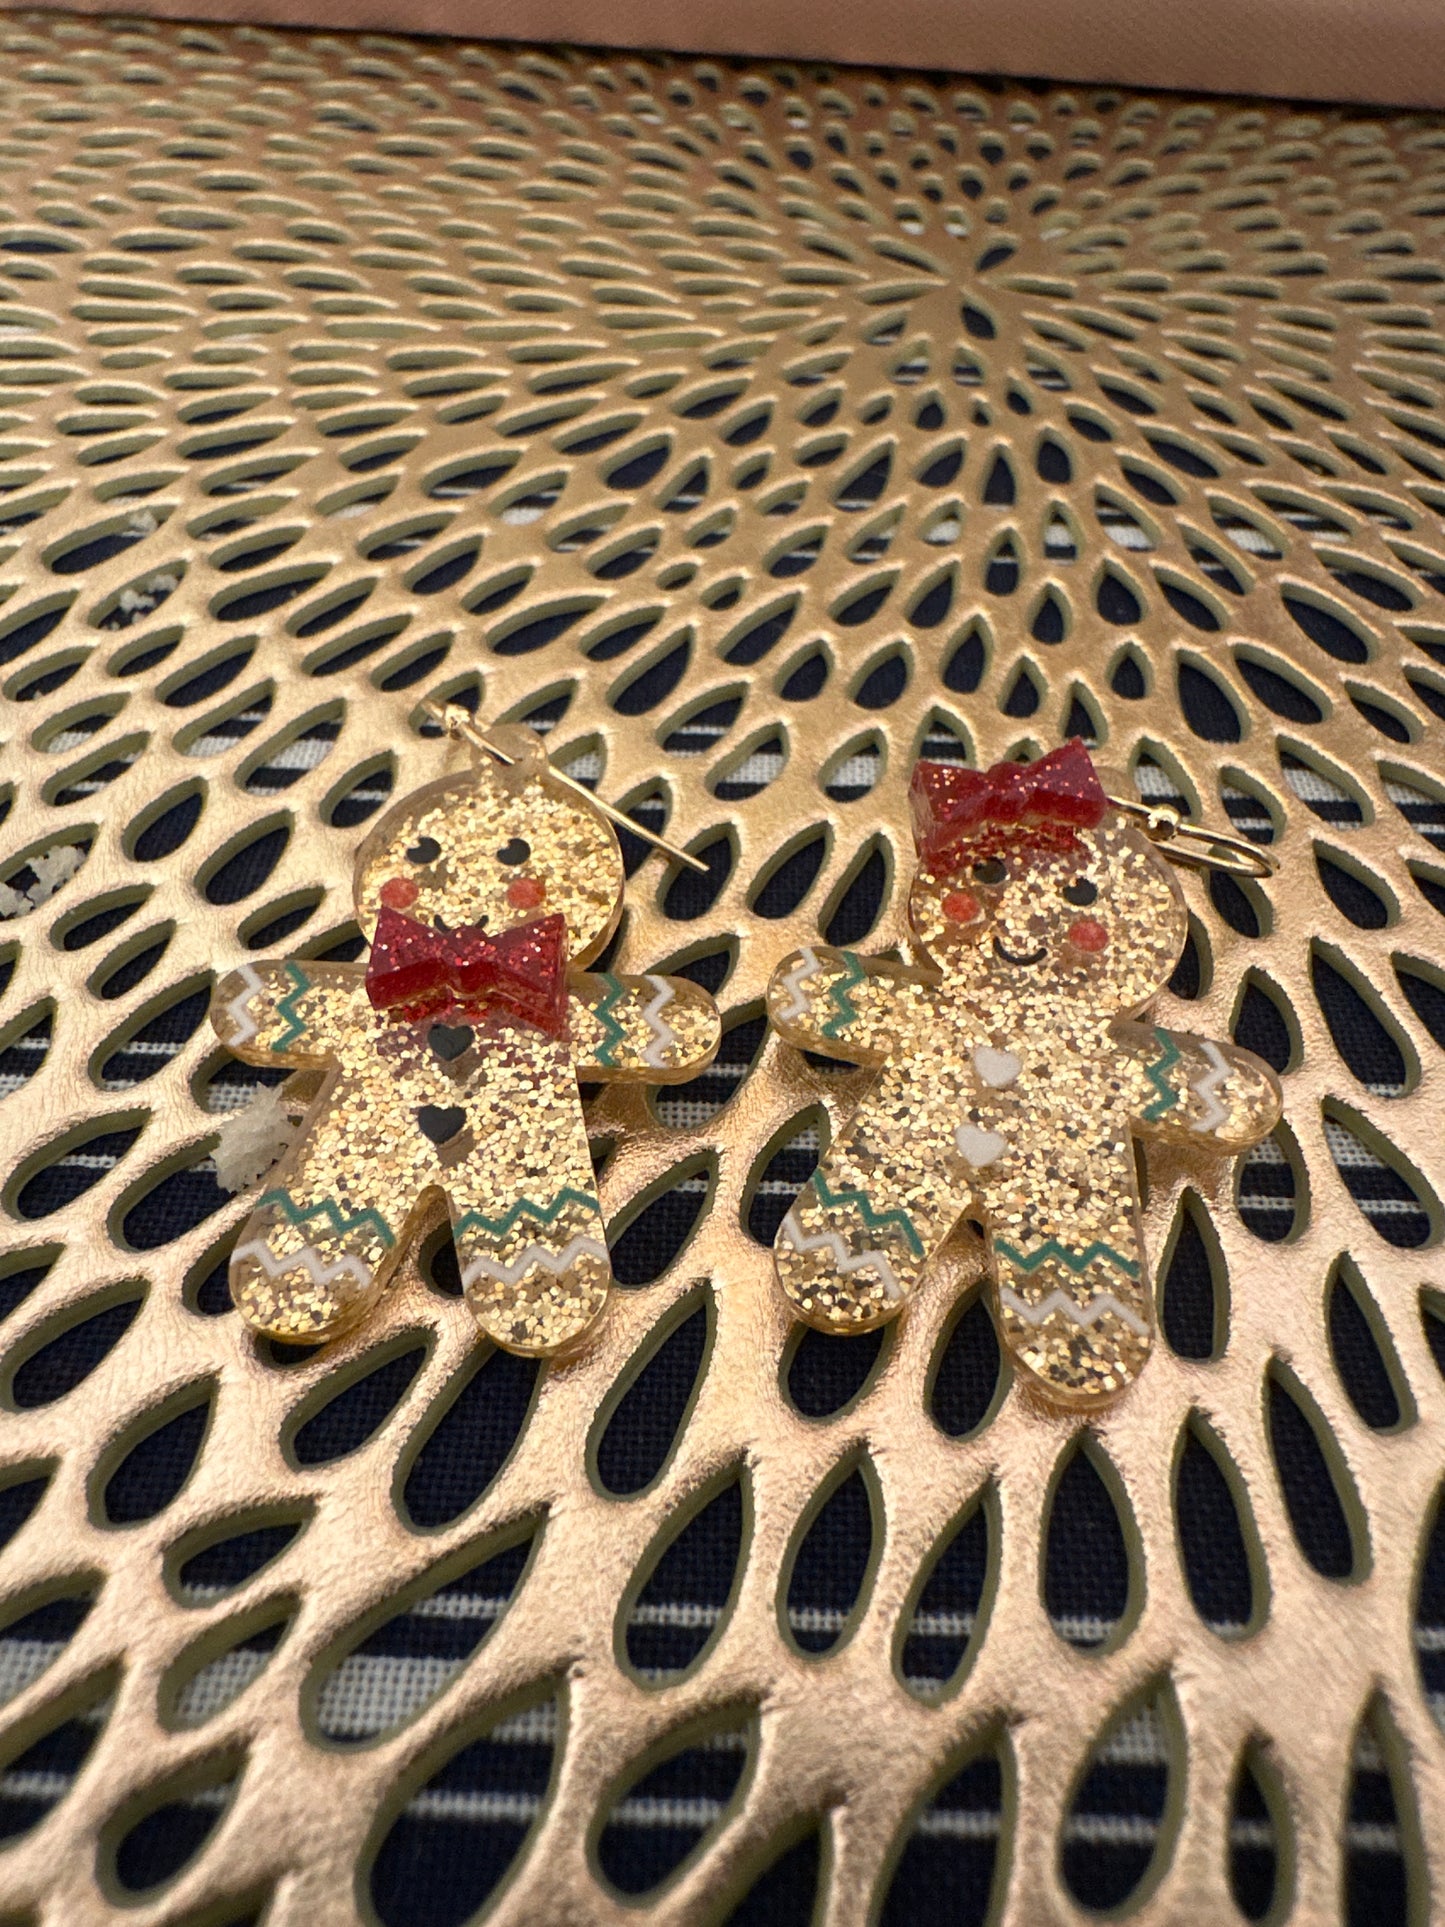 Glitter Gingerbread Man and Woman